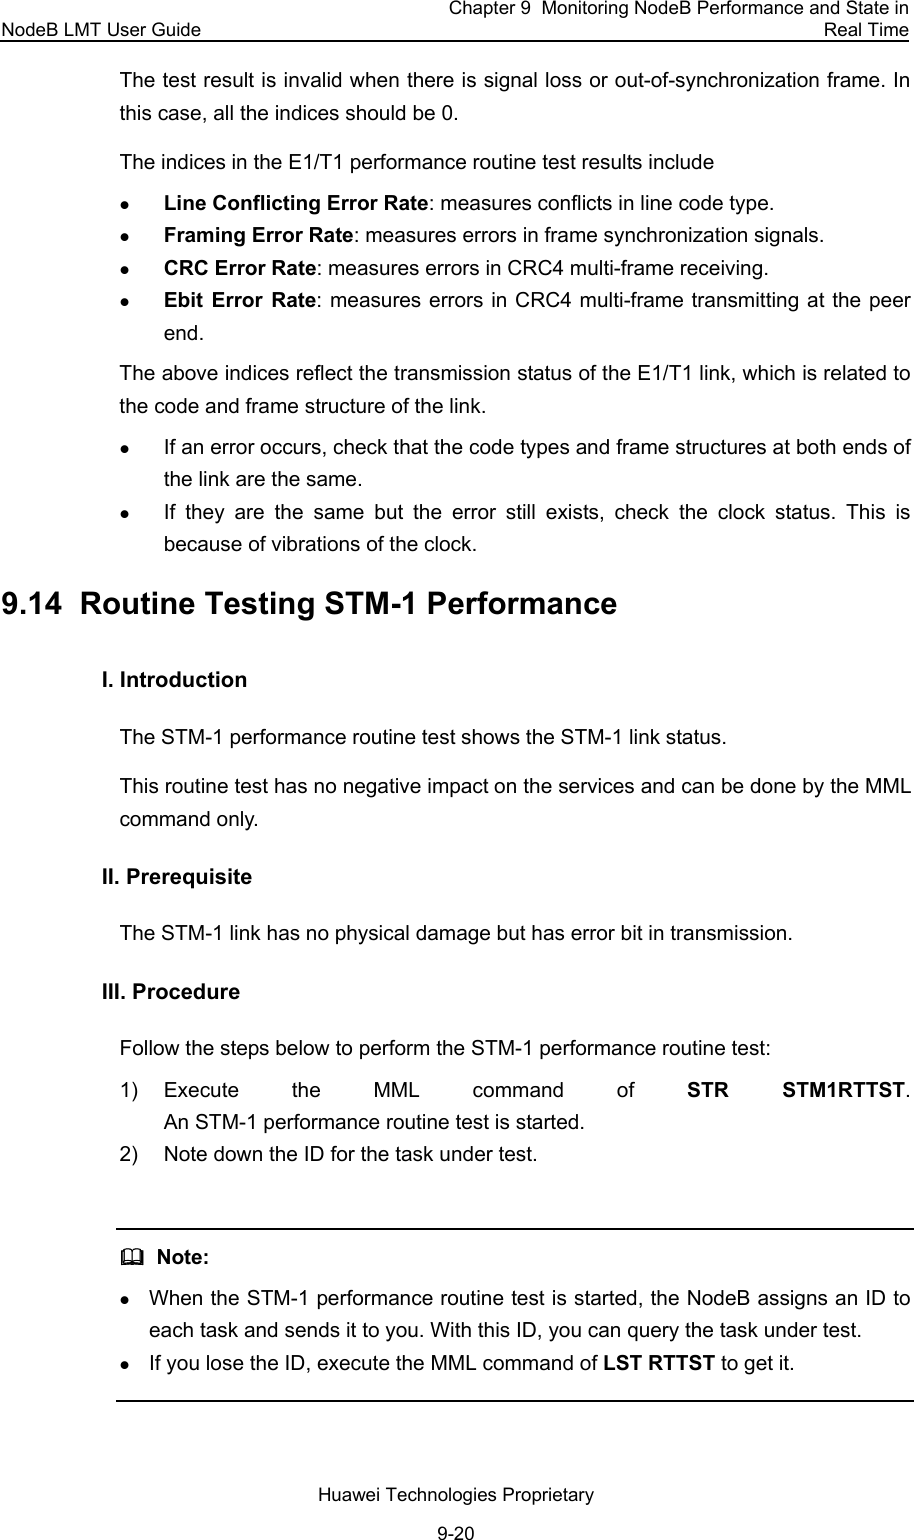 NodeB LMT User Guide Chapter 9  Monitoring NodeB Performance and State in Real Time Huawei Technologies Proprietary 9-20 The test result is invalid when there is signal loss or out-of-synchronization frame. In this case, all the indices should be 0. The indices in the E1/T1 performance routine test results include z Line Conflicting Error Rate: measures conflicts in line code type. z Framing Error Rate: measures errors in frame synchronization signals. z CRC Error Rate: measures errors in CRC4 multi-frame receiving. z Ebit Error Rate: measures errors in CRC4 multi-frame transmitting at the peer end. The above indices reflect the transmission status of the E1/T1 link, which is related to the code and frame structure of the link.  z If an error occurs, check that the code types and frame structures at both ends of the link are the same.  z If they are the same but the error still exists, check the clock status. This is because of vibrations of the clock.  9.14  Routine Testing STM-1 Performance I. Introduction  The STM-1 performance routine test shows the STM-1 link status.  This routine test has no negative impact on the services and can be done by the MML command only.  II. Prerequisite The STM-1 link has no physical damage but has error bit in transmission.  III. Procedure Follow the steps below to perform the STM-1 performance routine test:  1) Execute the MML command of STR STM1RTTST.  An STM-1 performance routine test is started. 2)  Note down the ID for the task under test.    Note: z When the STM-1 performance routine test is started, the NodeB assigns an ID to each task and sends it to you. With this ID, you can query the task under test.  z If you lose the ID, execute the MML command of LST RTTST to get it.  